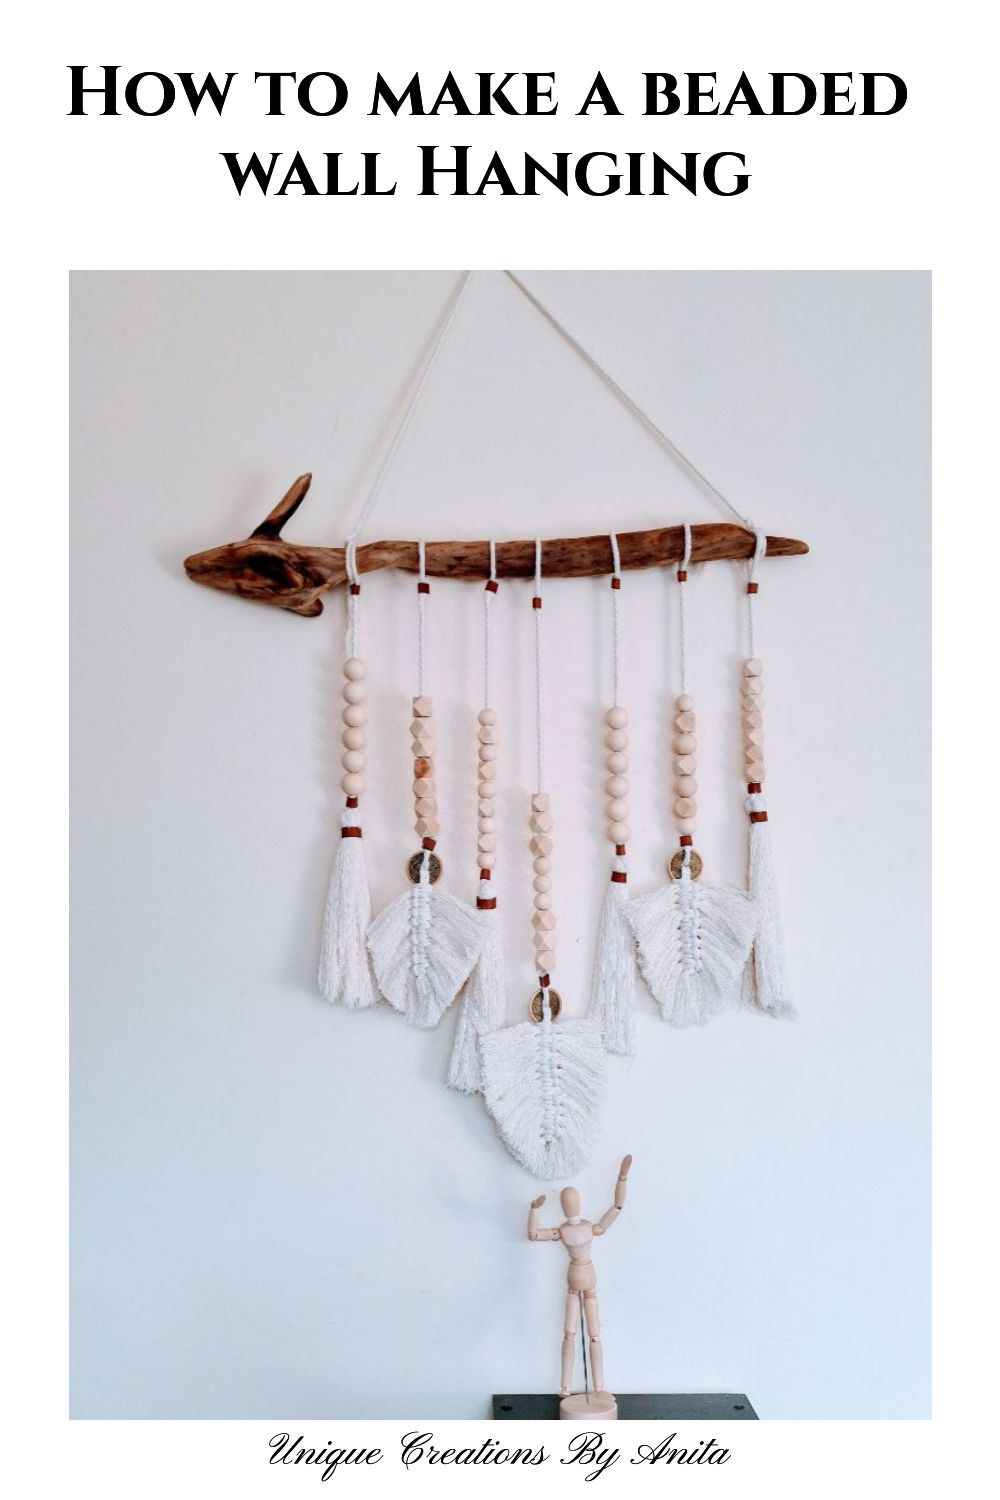 DIY wall hanging made with beads and rope for home decor.